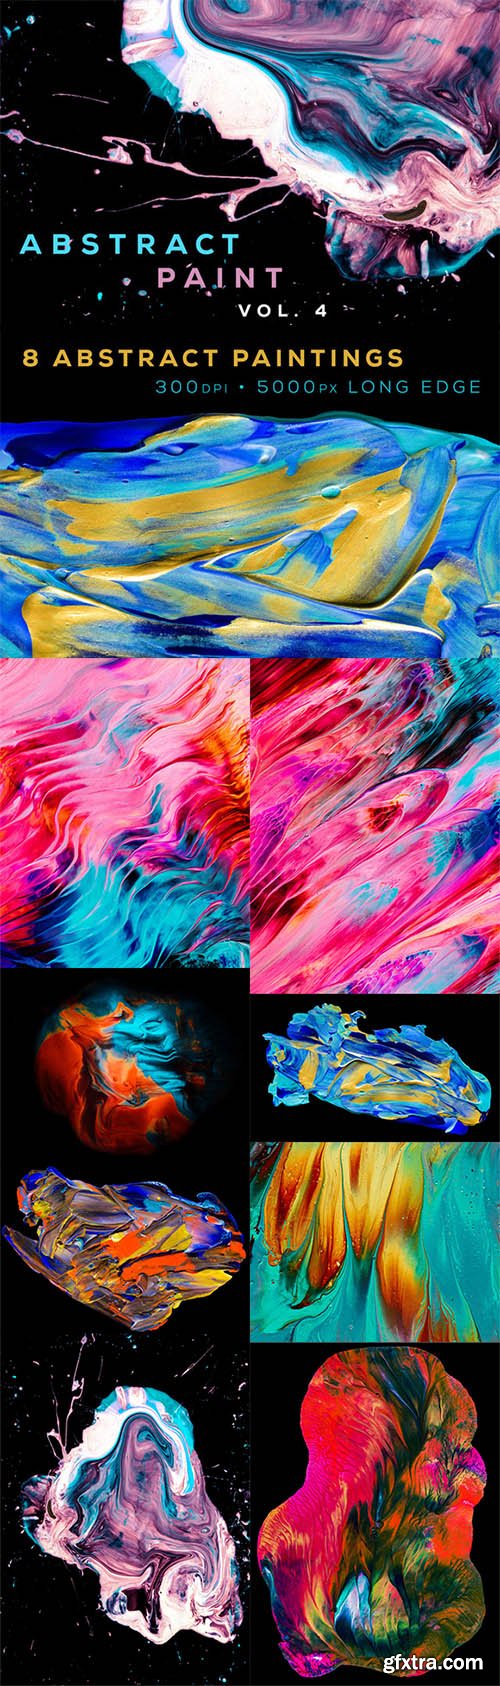 Abstract Paint, Vol 4 - CM 532984